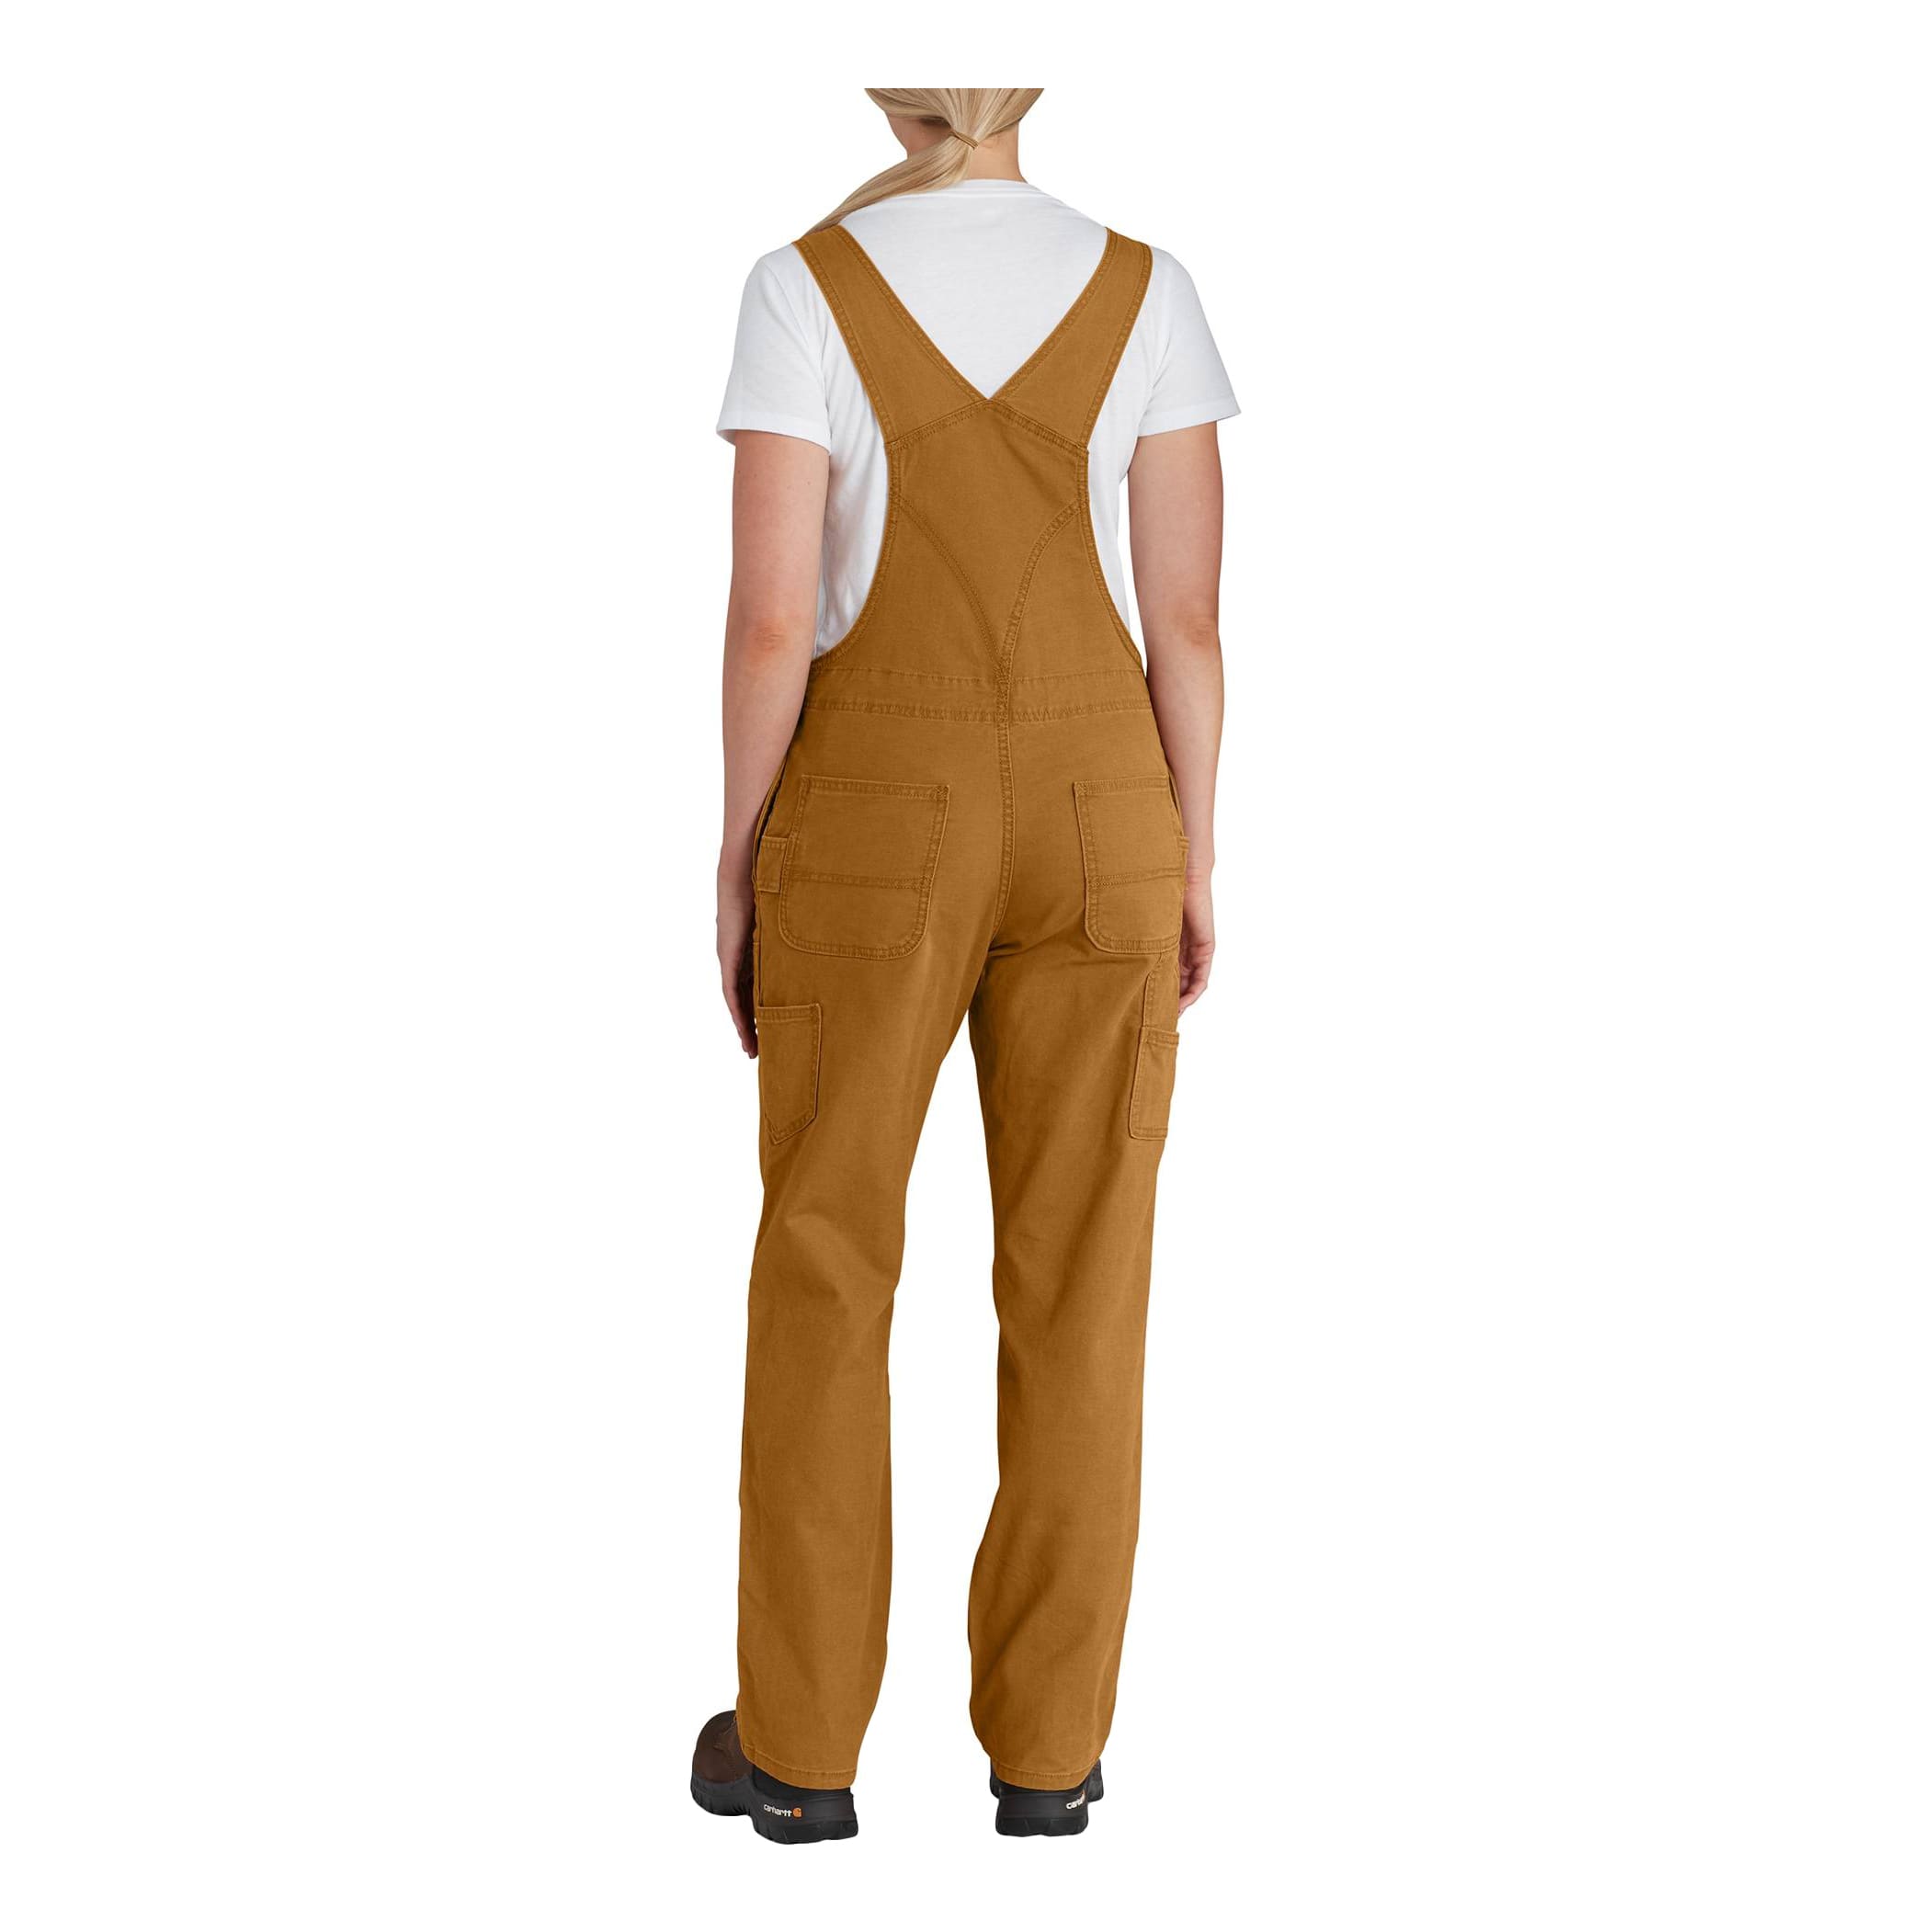 Carhartt, Pants & Jumpsuits, Carhartt 2213 Womens Loose Fit Fleece Lined  Crawford Pant Size 10